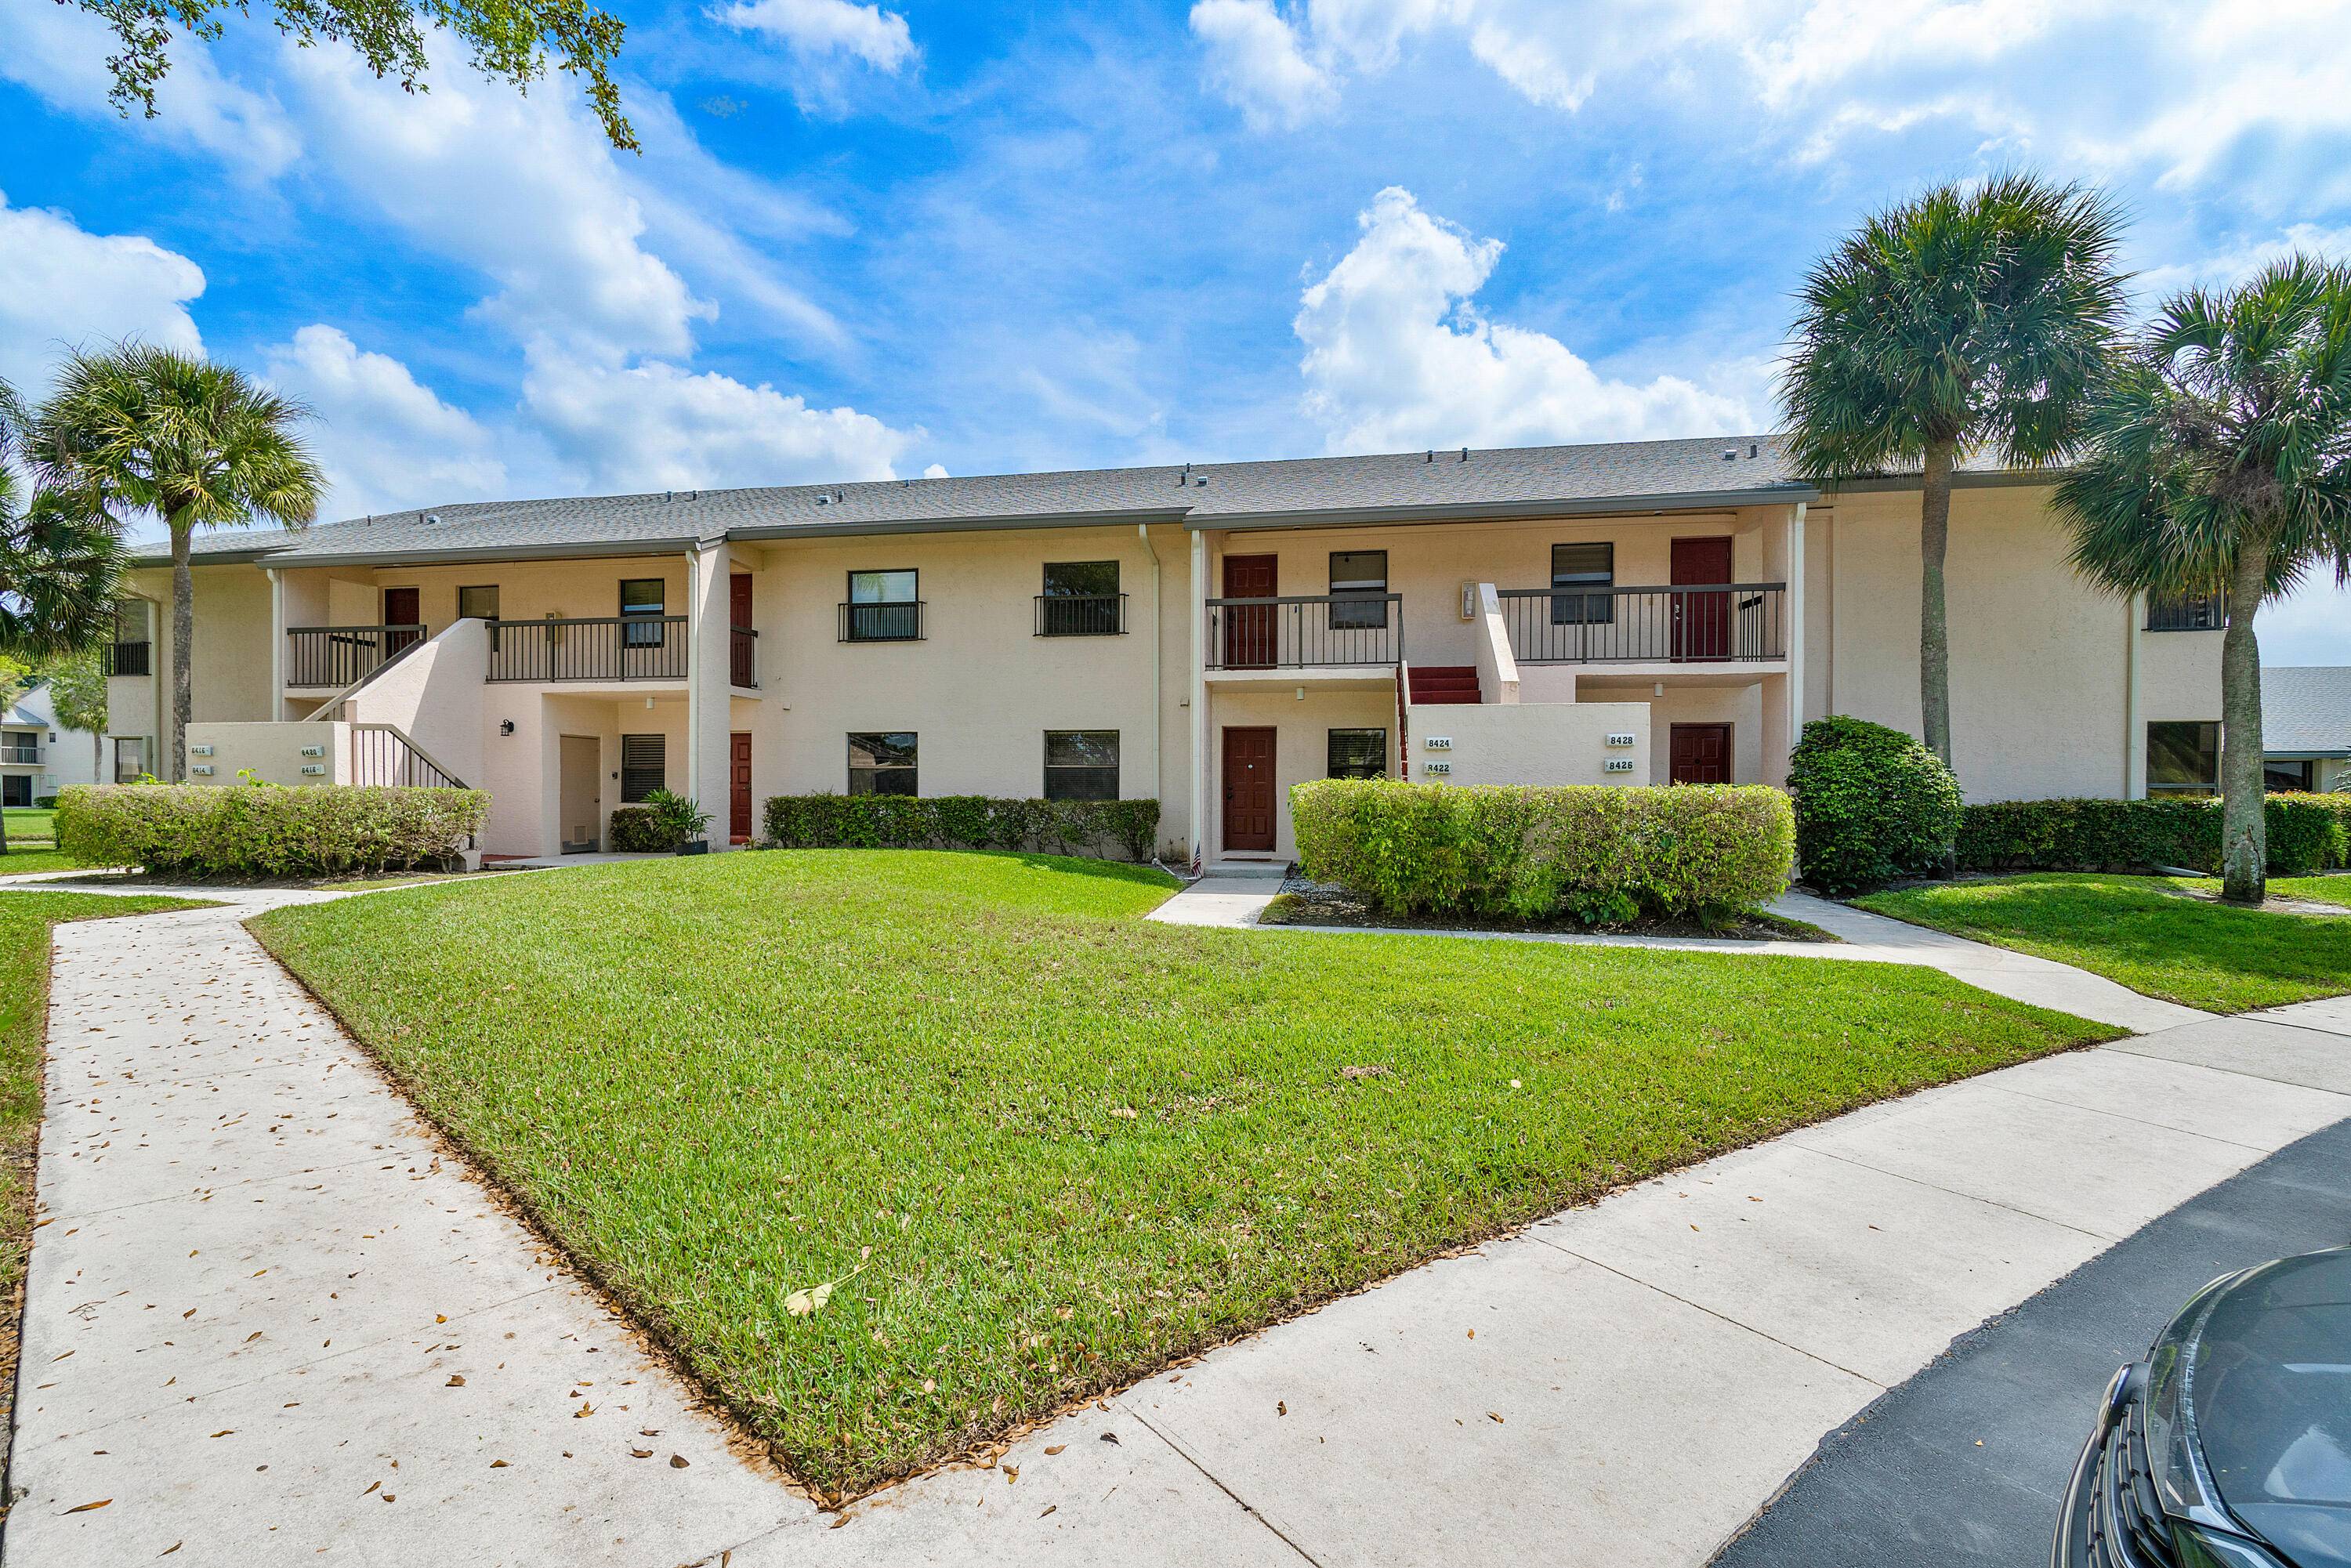 Welcome to the community of Boca Glades, a beautiful community with amazing amenities including a heated pool, hot tub spa, sauna, tennis pickleball courts, clubhouse, arcade room, etc.